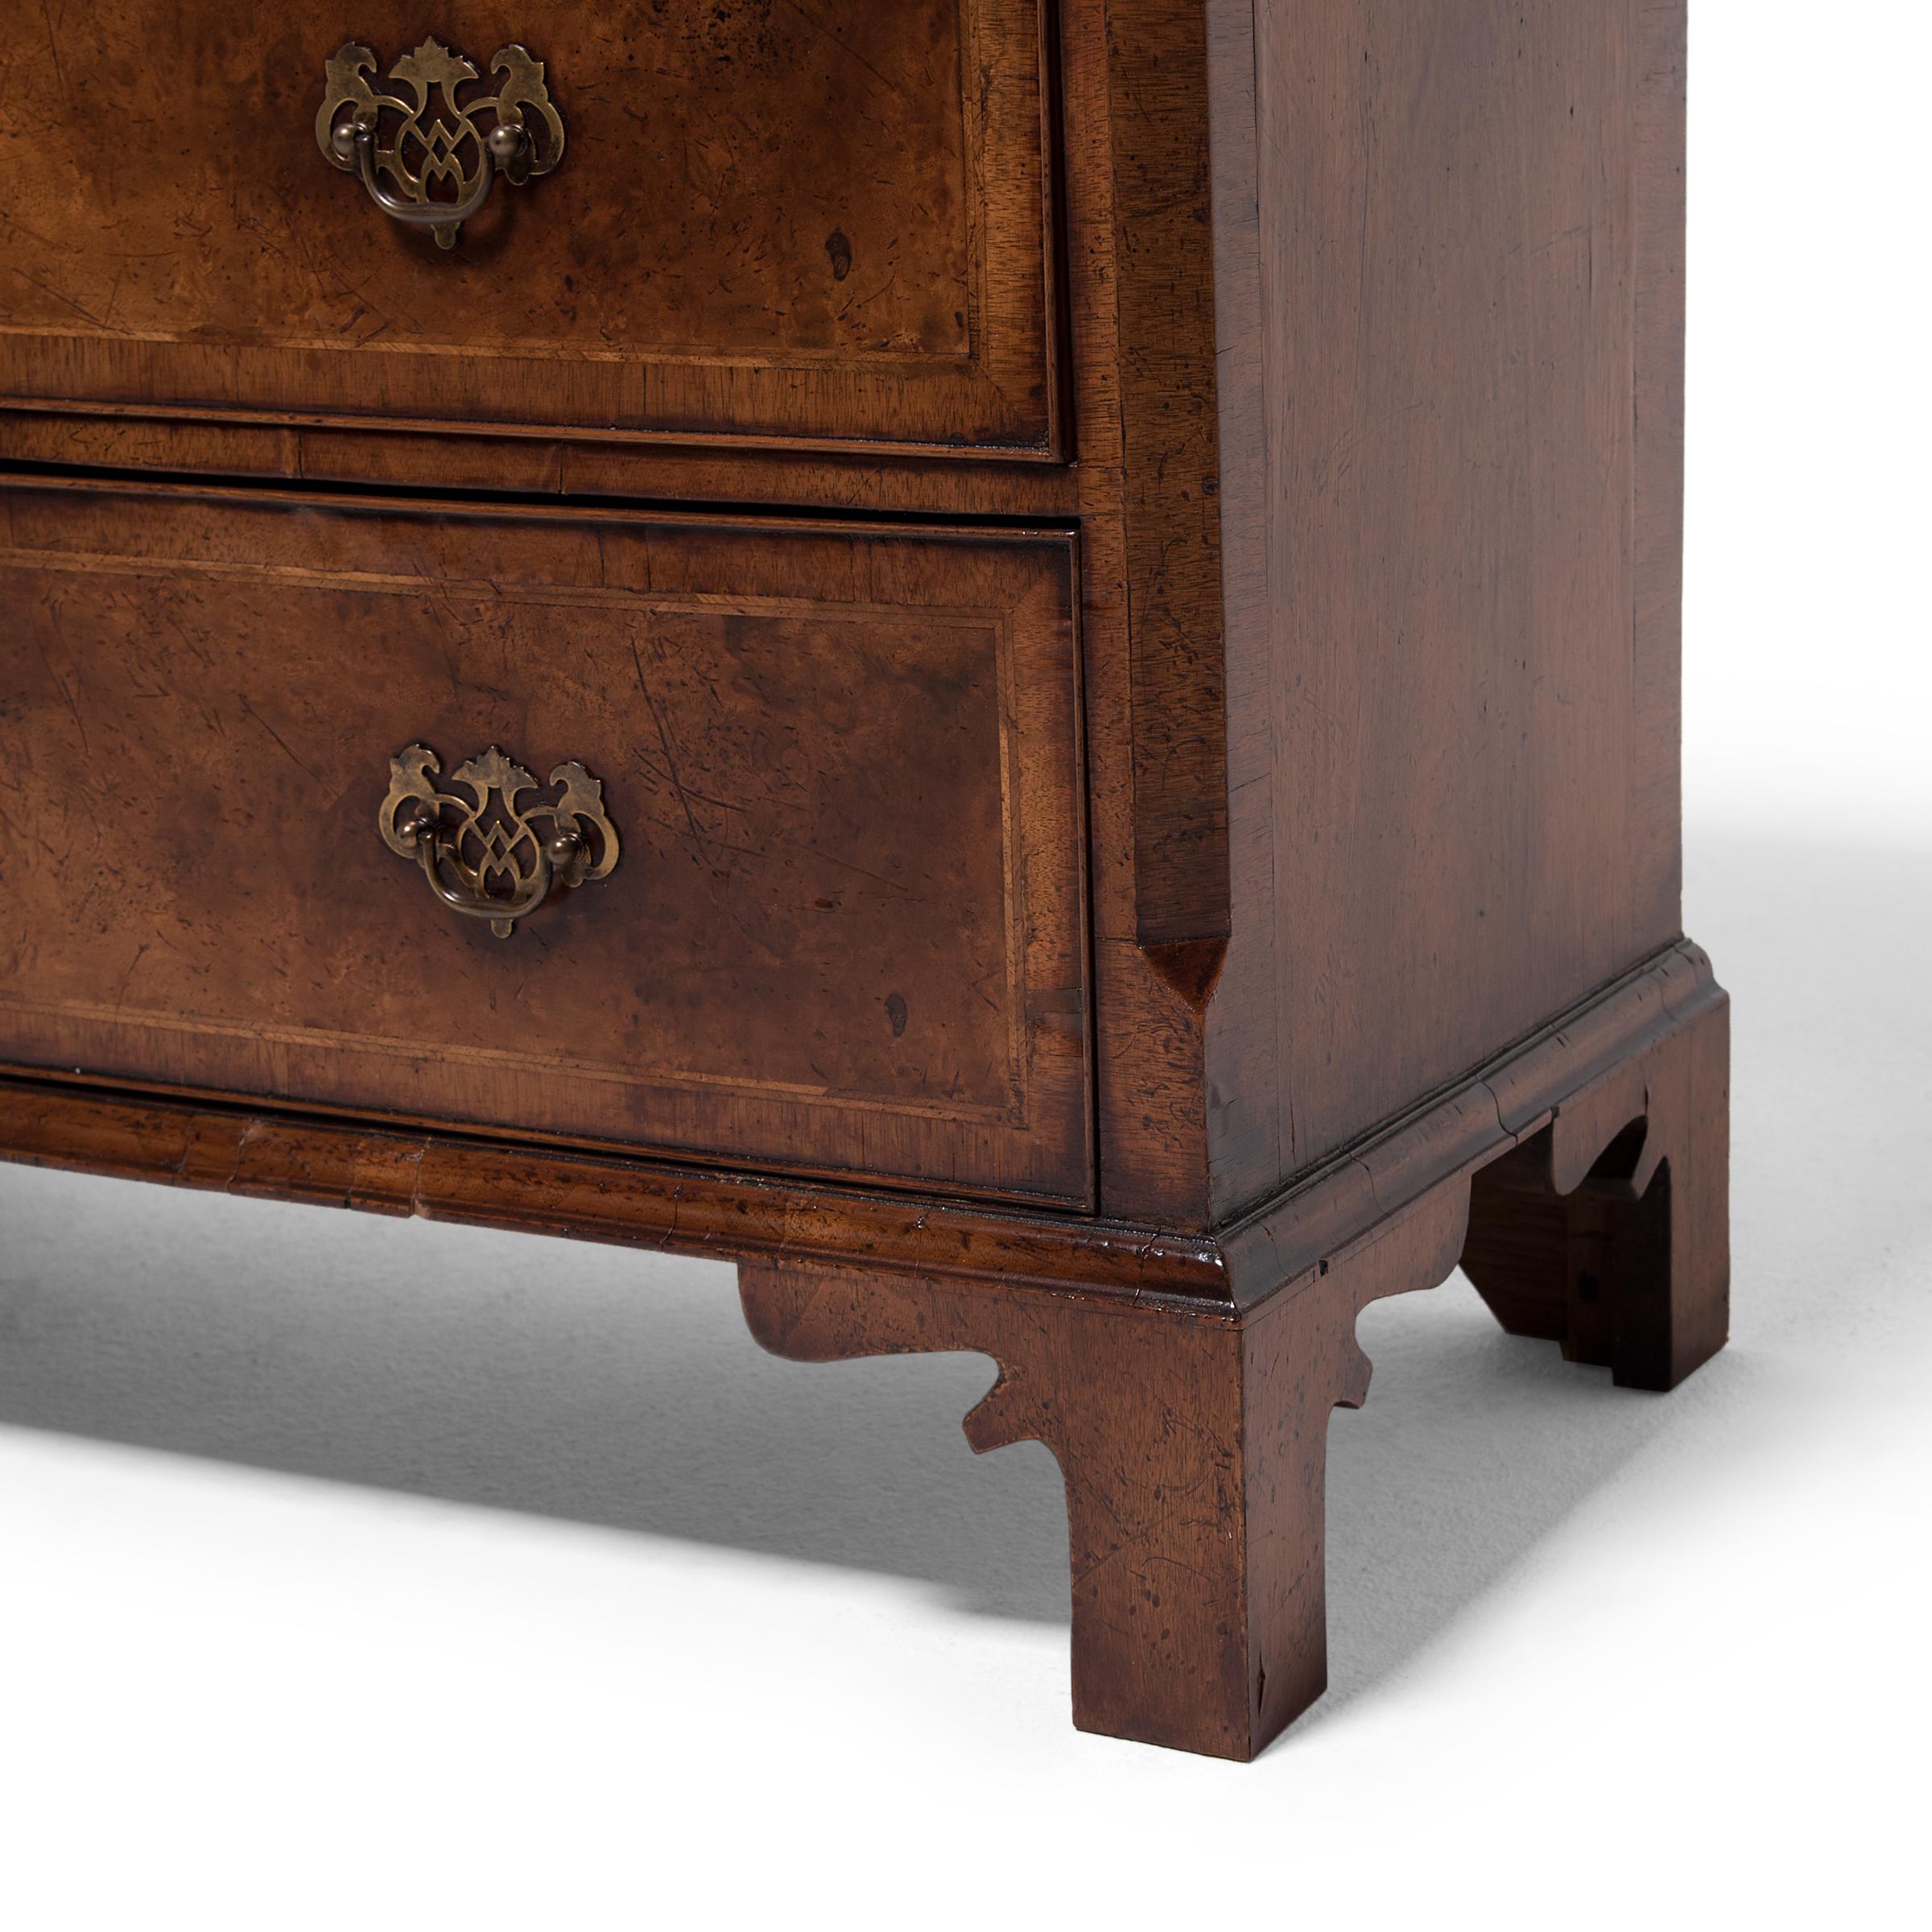 Brass Queen Anne Style Burled Walnut Chest of Drawers, c. 1800 For Sale